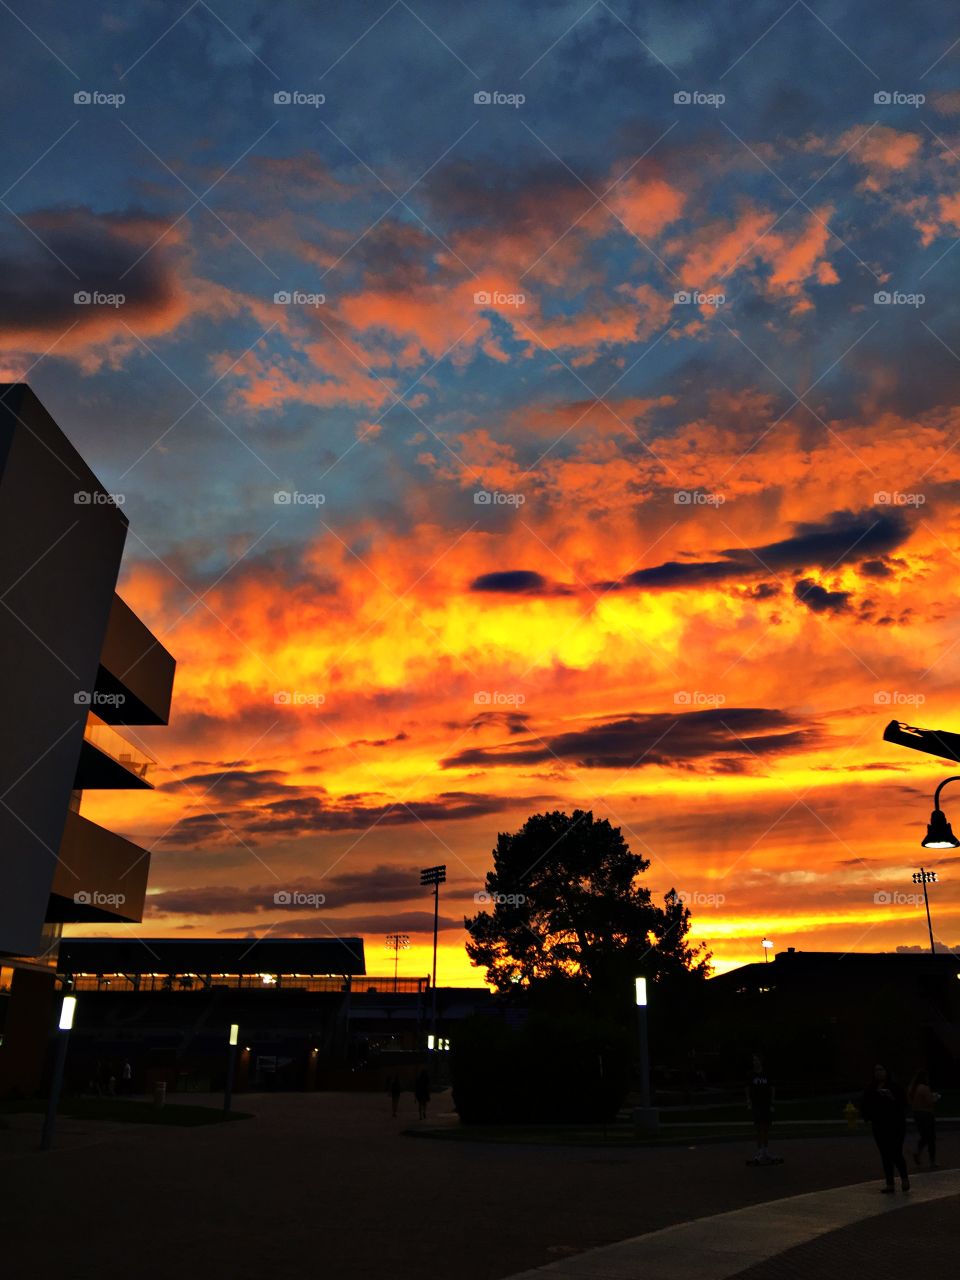 This photo captures a fiery sunset on a college campus in Phoenix, Arizona. 